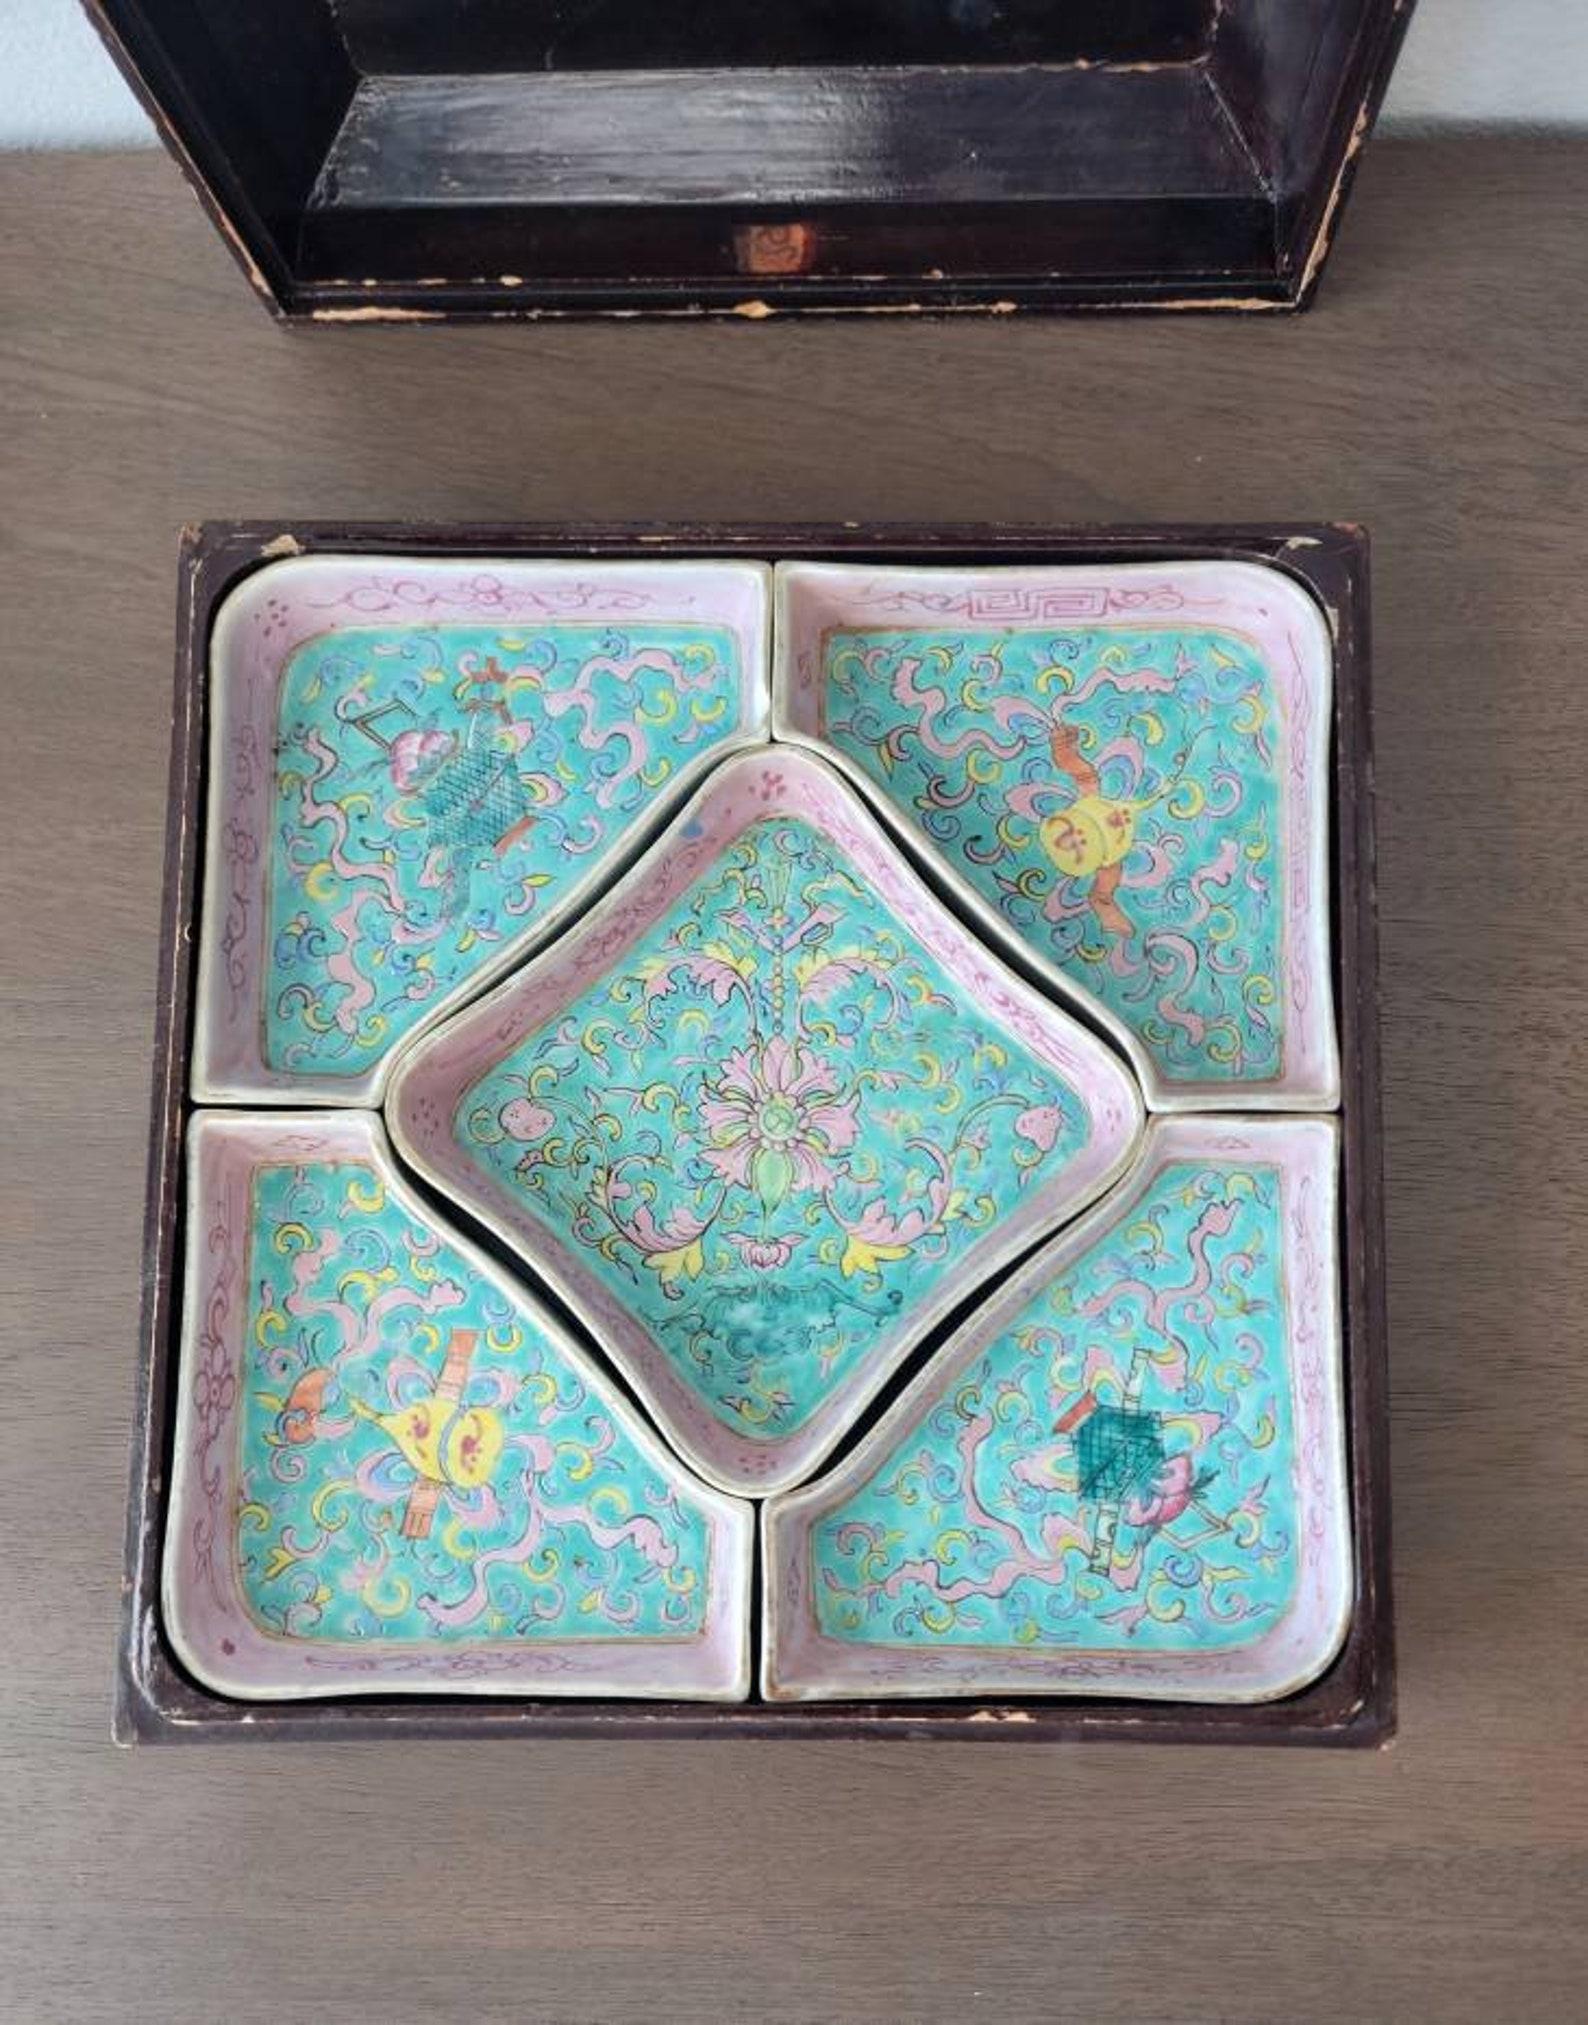 An antique Qing Dynasty Chinese sweetmeat (confectionery or sweet food) box, dating to the early 20th century, featuring a lacquered and parcel gilt painted box decorated in a stylized naturalistic scene, opening to reveal five-piece polychrome